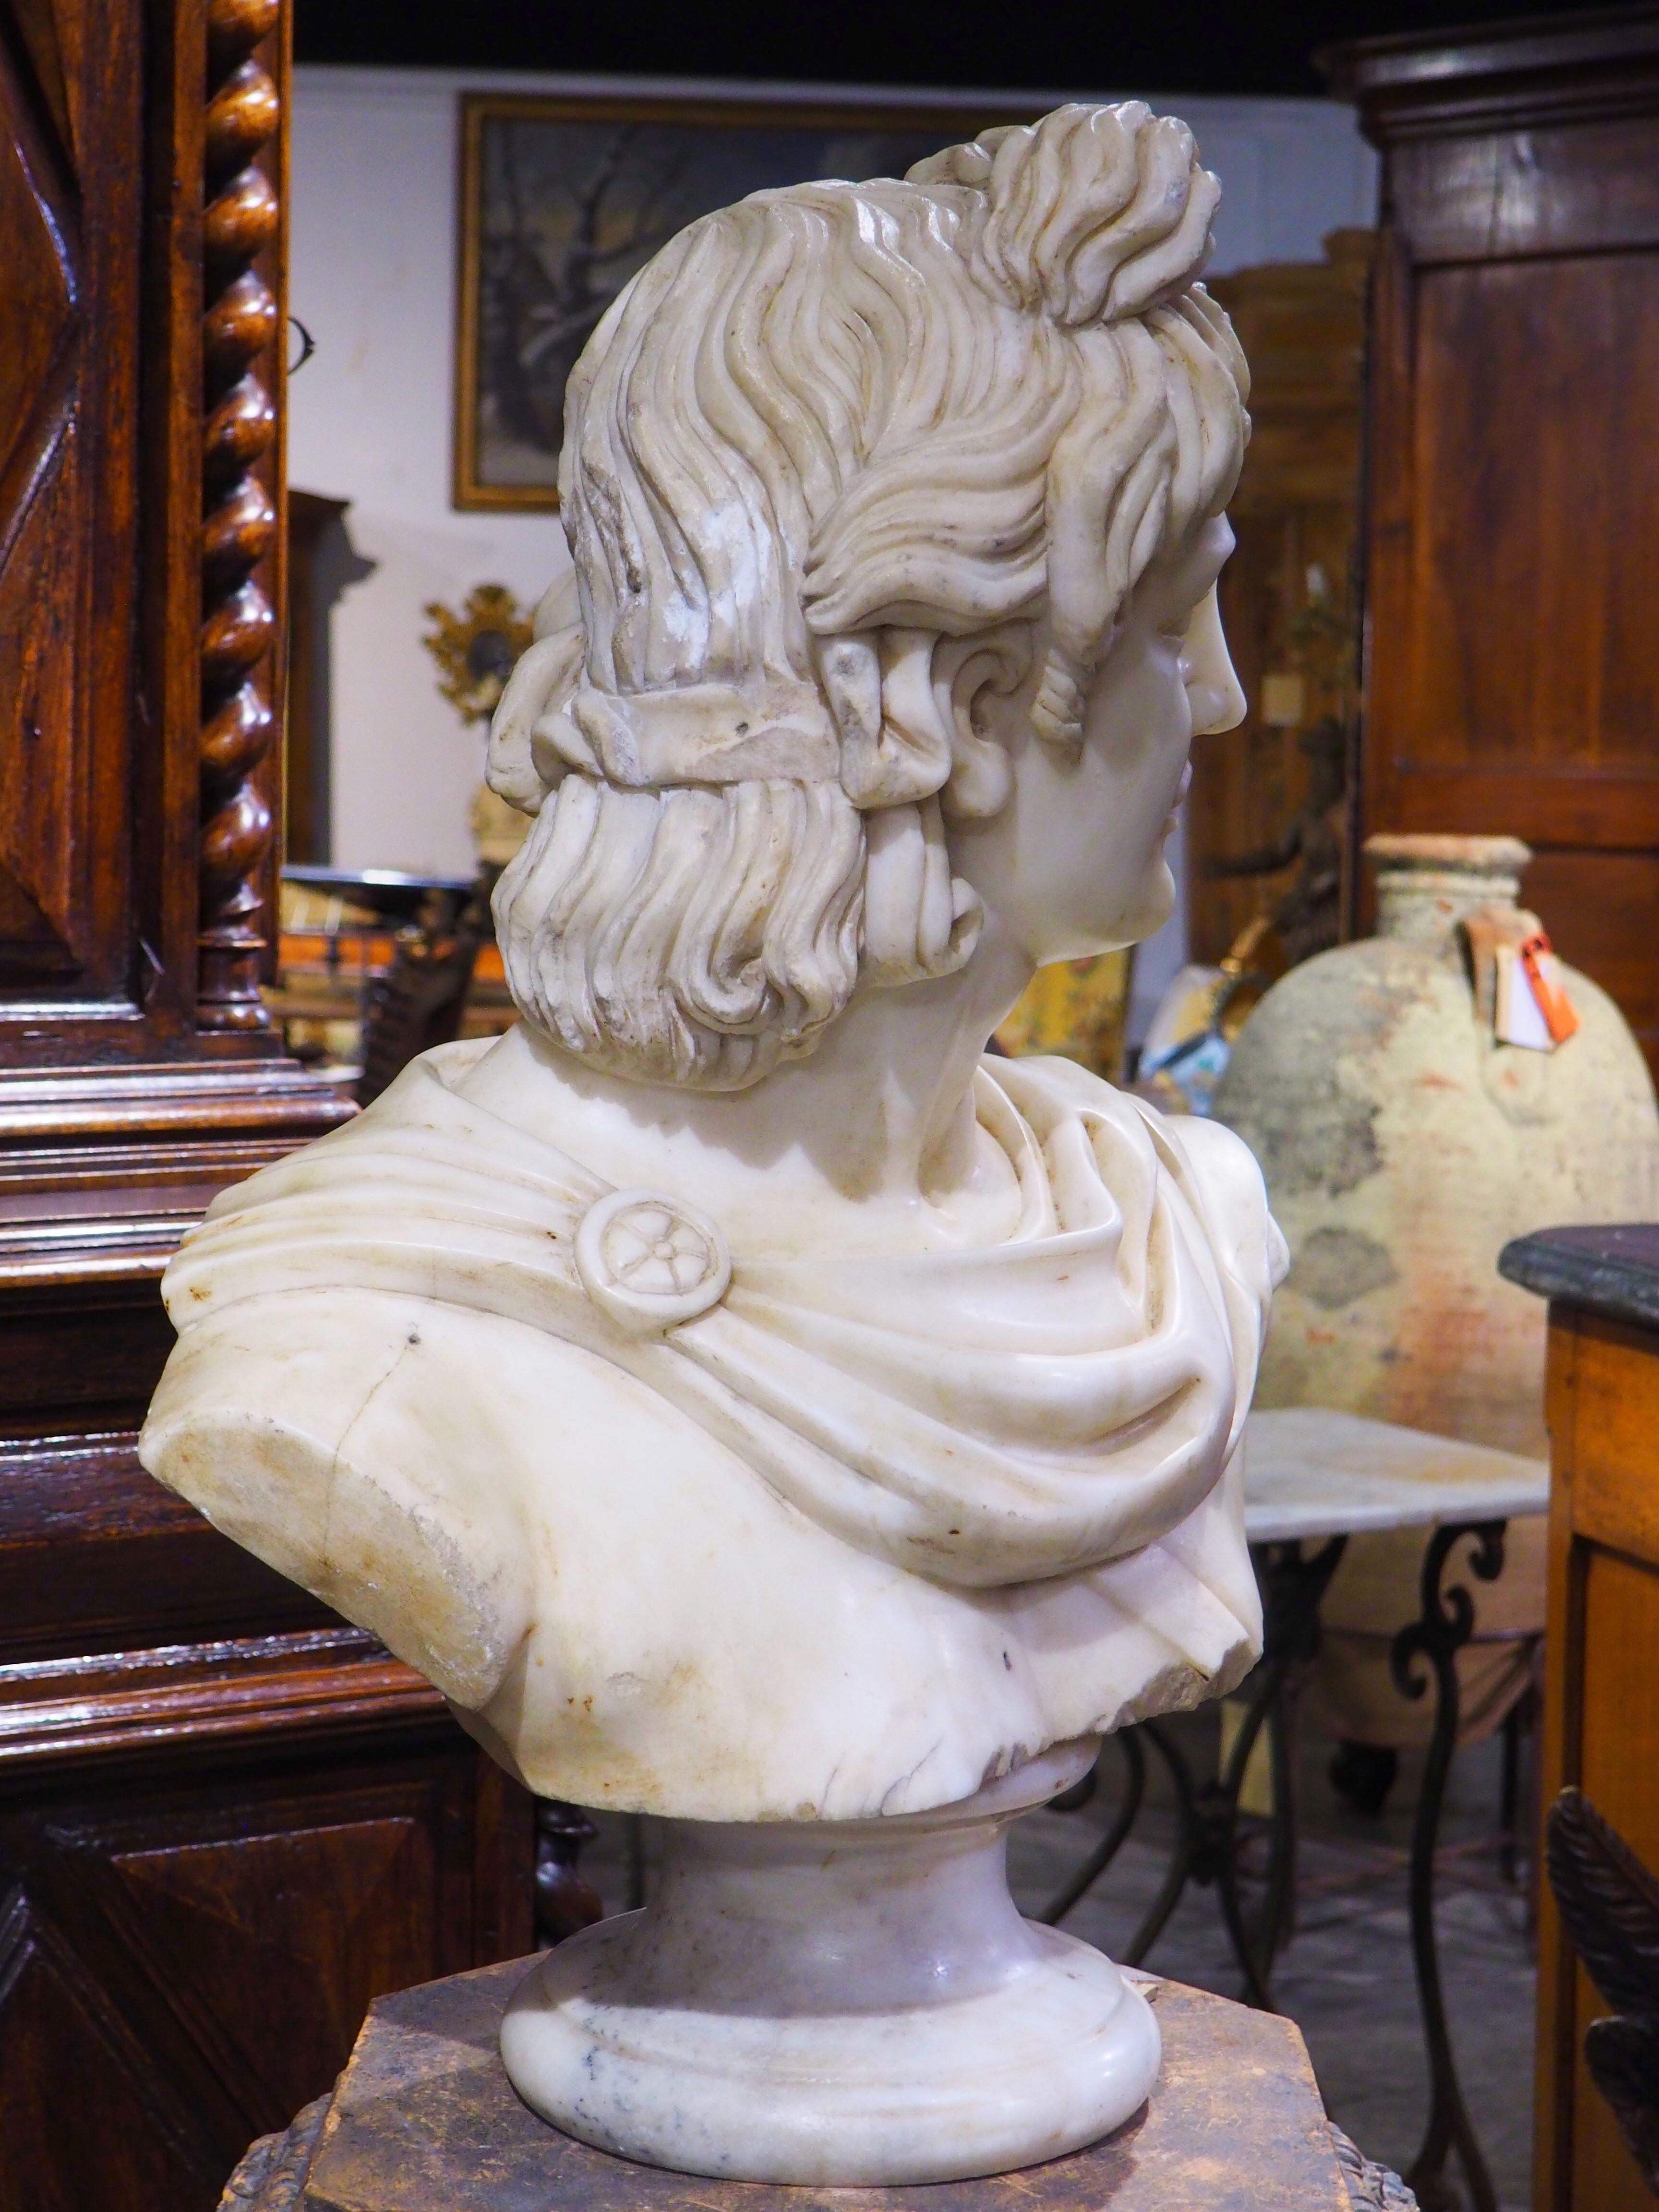 Hand-Carved Antique Italian Carved Marble Bust of Apollo Belvedere, 19th Century